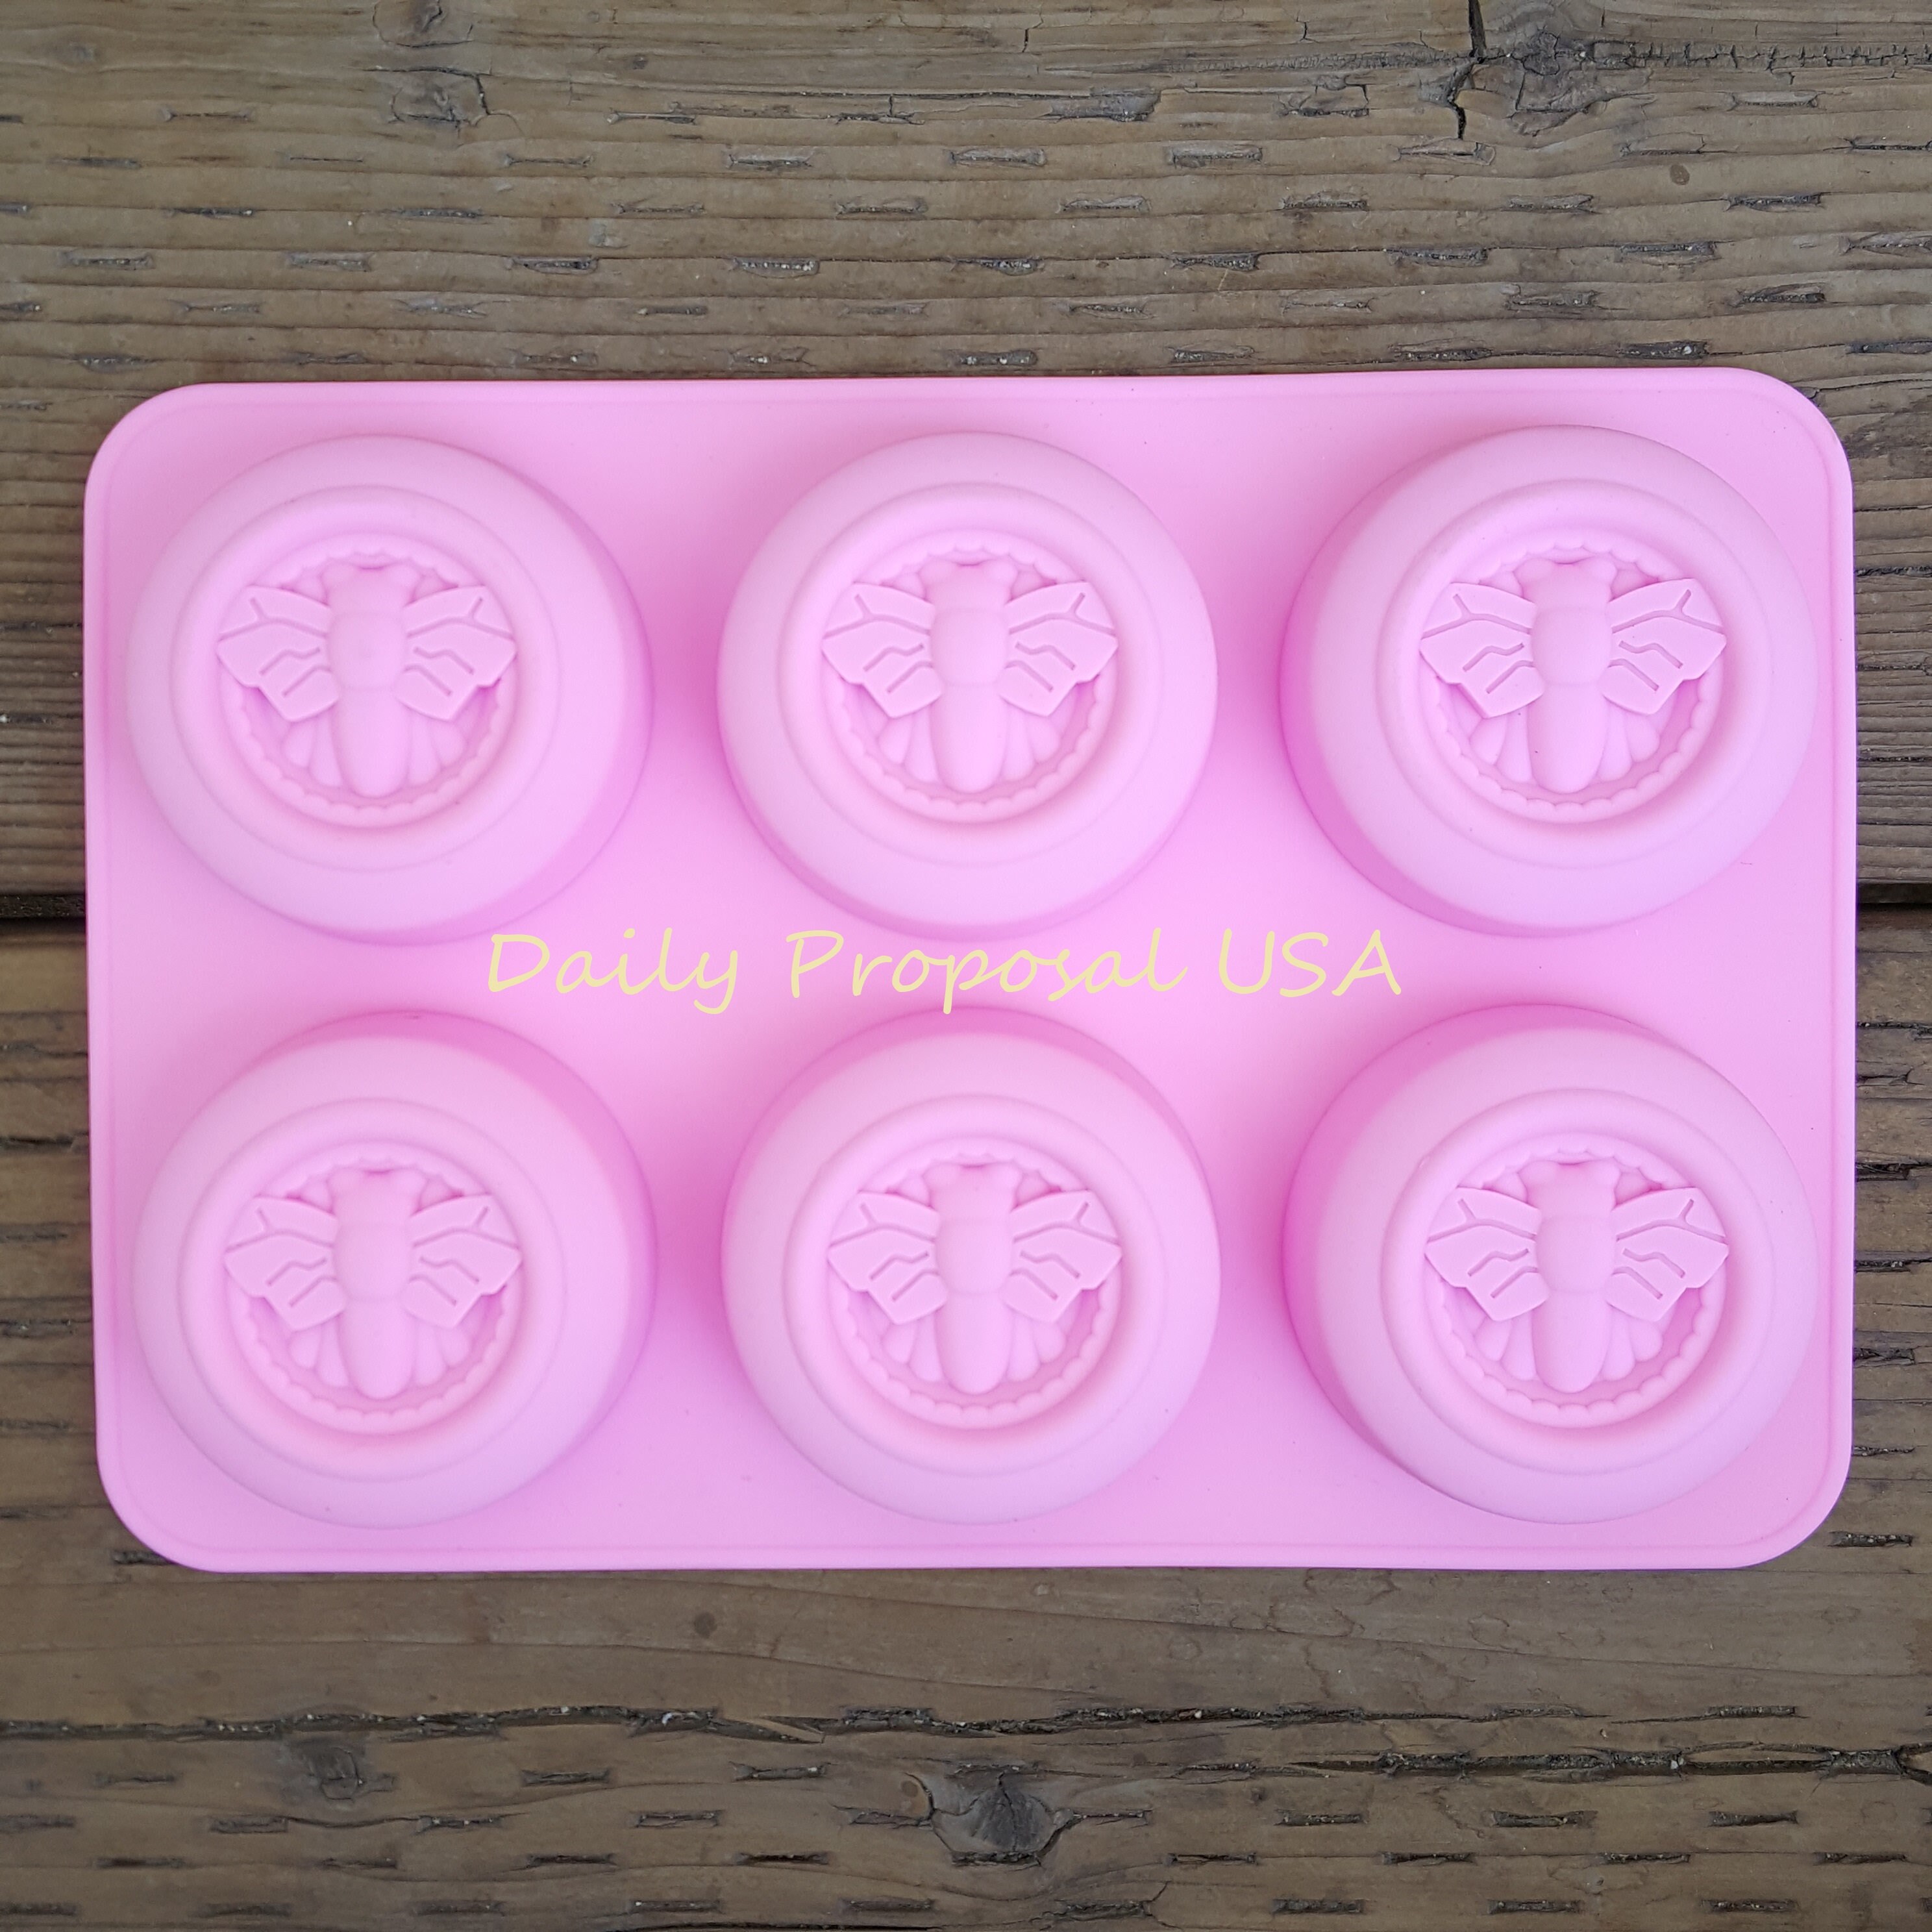 Silicone Mini Ice Bar Mold 6 cavities Ice Cube Silicone Mold With Lid  Bottled Beverages Ice Tray Popsicle Mold Gadgets Kitchen